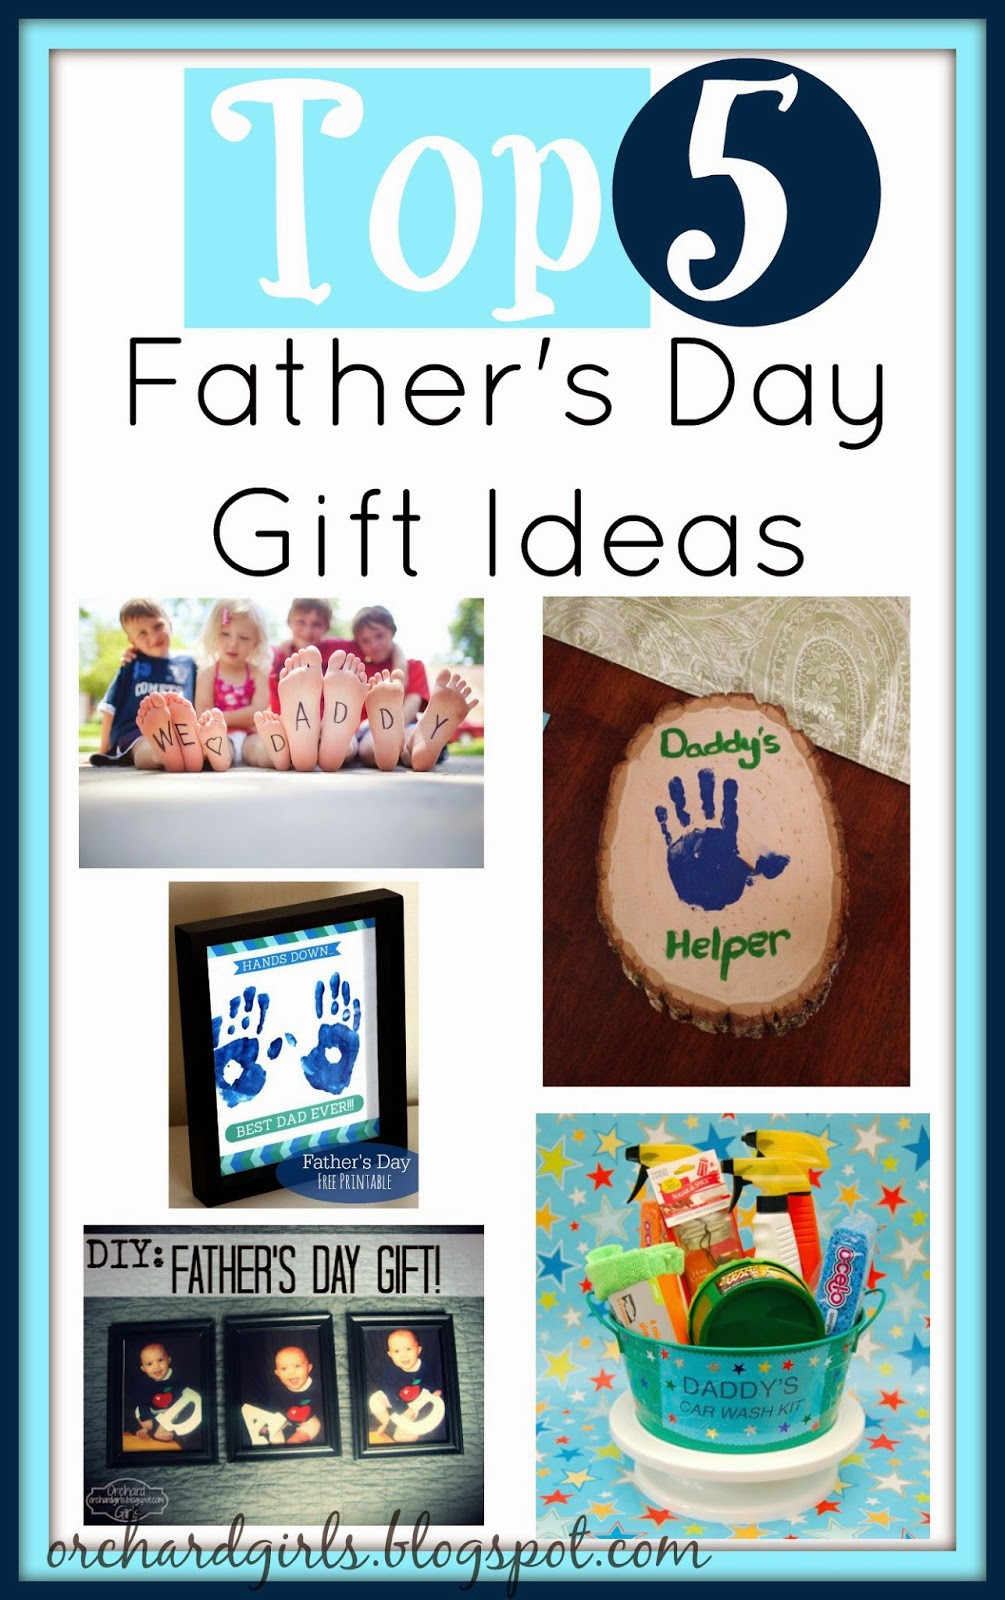 Best Fathers Day Gift Ideas
 Orchard Girls Top 5 Father s Day Gift Ideas from Kids